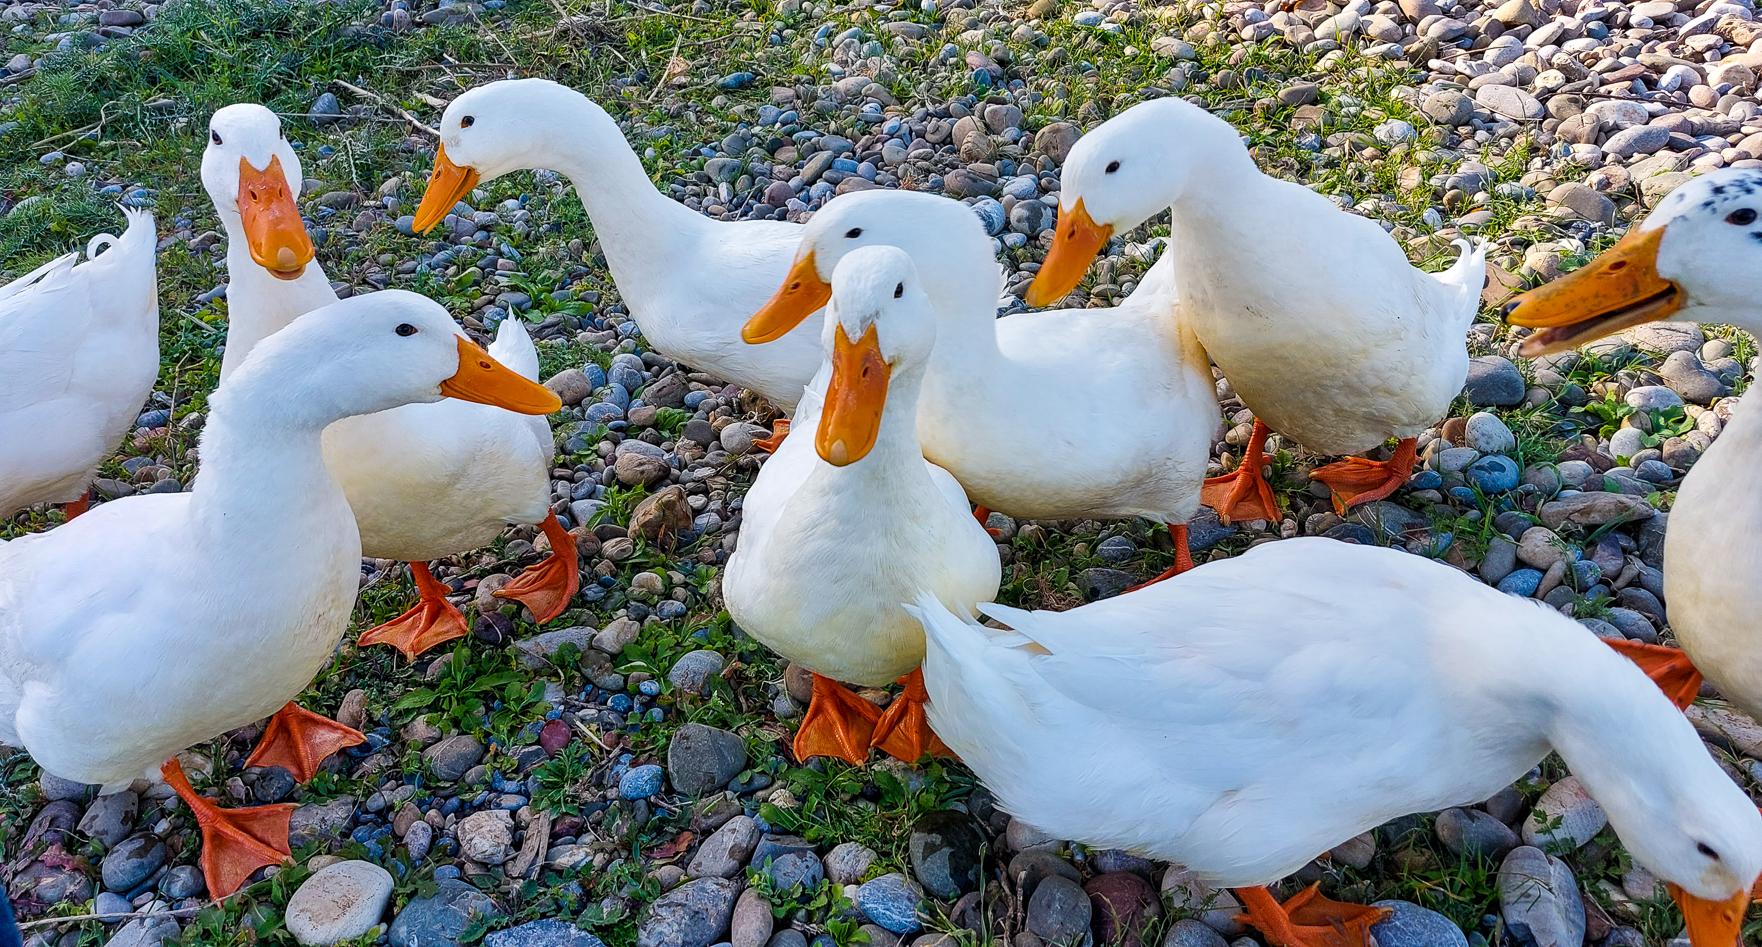 <span  class="uc_style_uc_tiles_grid_image_elementor_uc_items_attribute_title" style="color:#ffffff;">So cute: ducks running around Wischnewski</span>